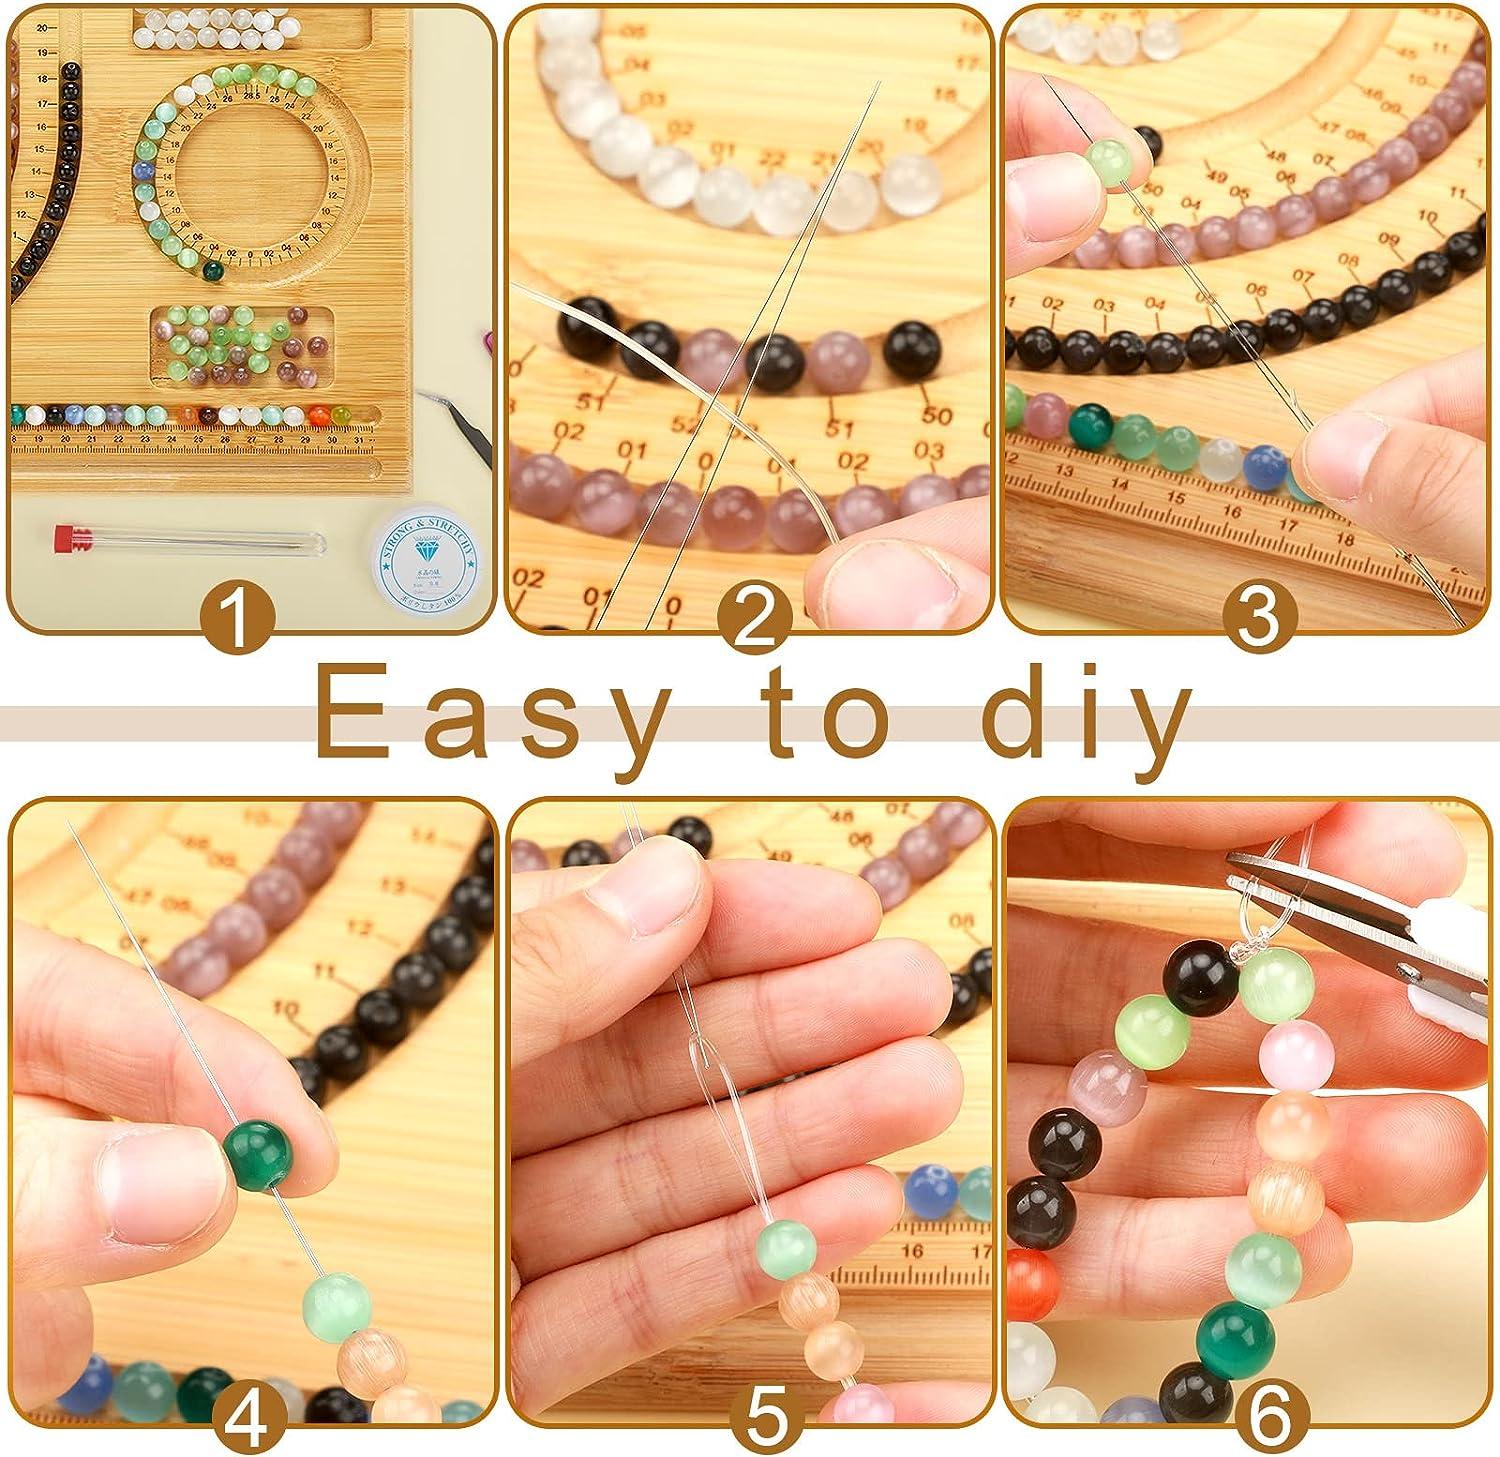 Bead Boards Jewelry Making, Bead Design Board Necklace